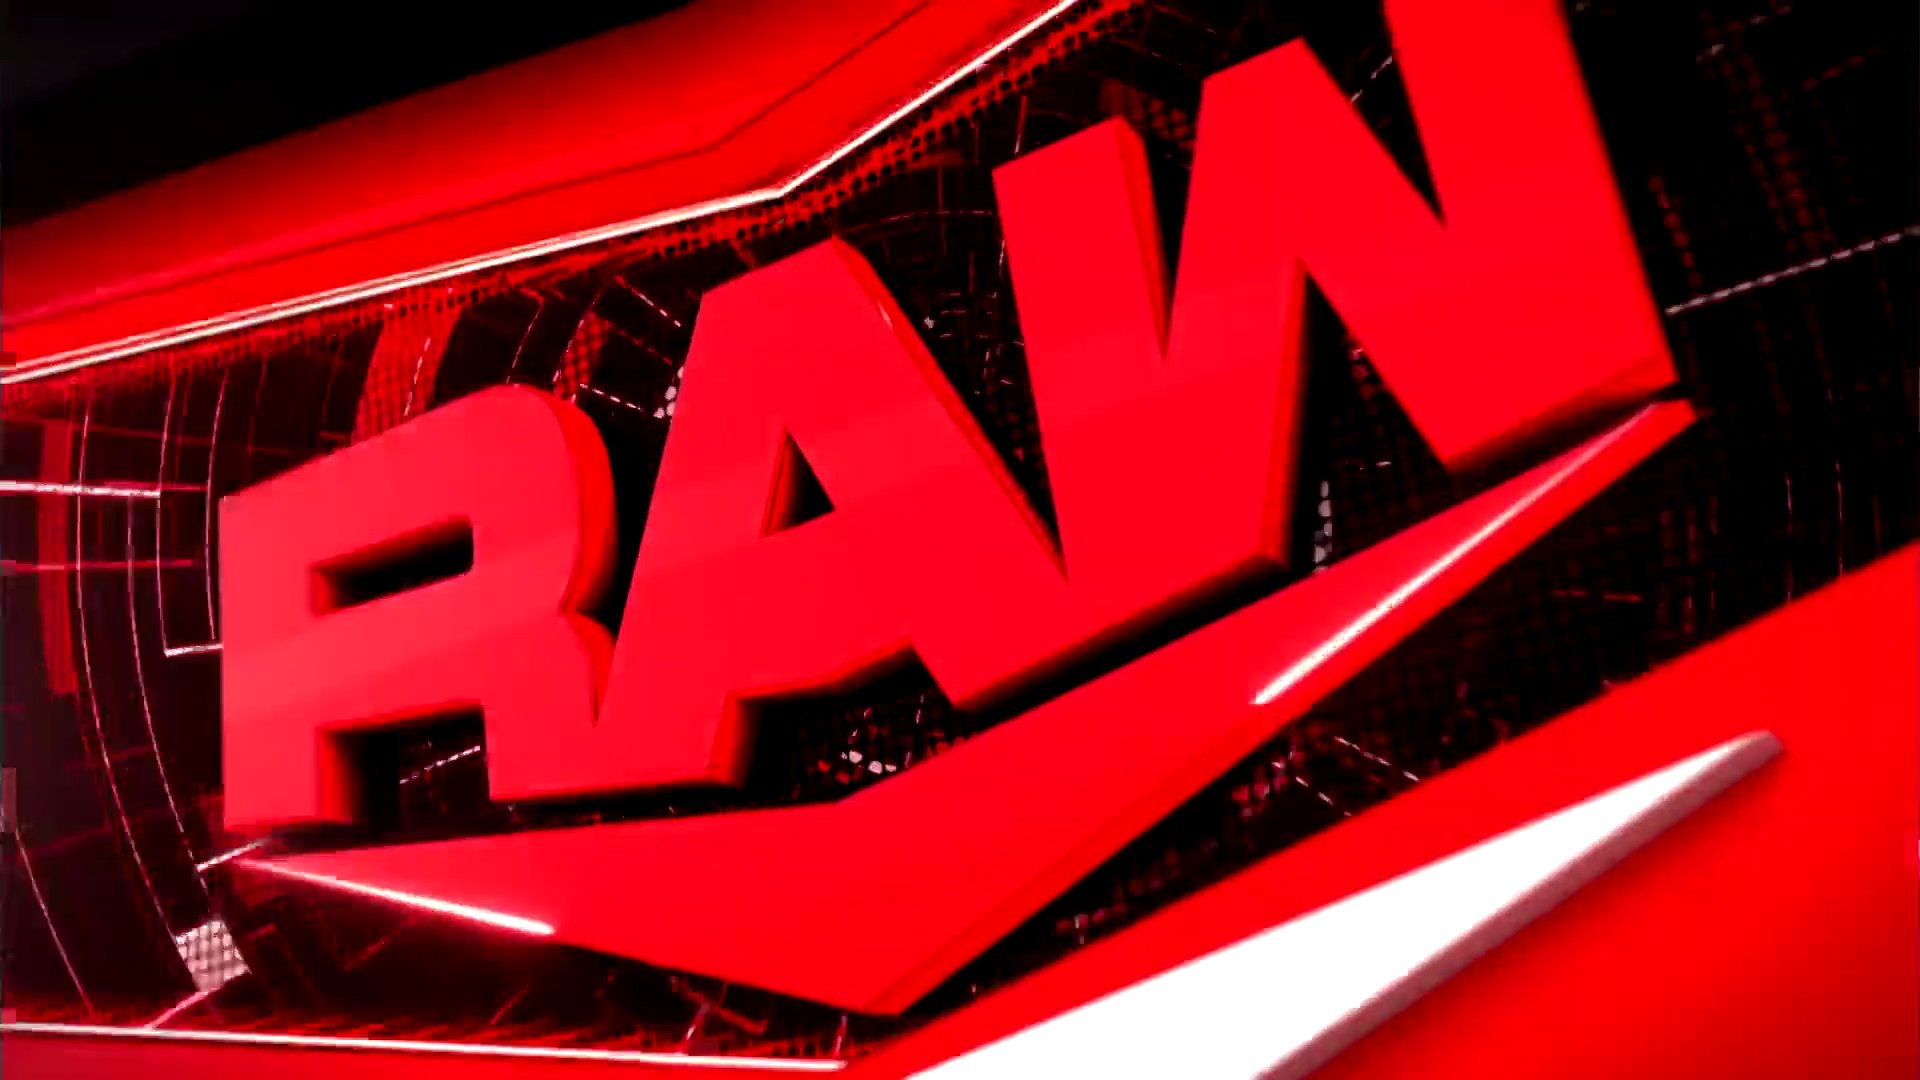 Matches Set for Next Monday's WWE RAW